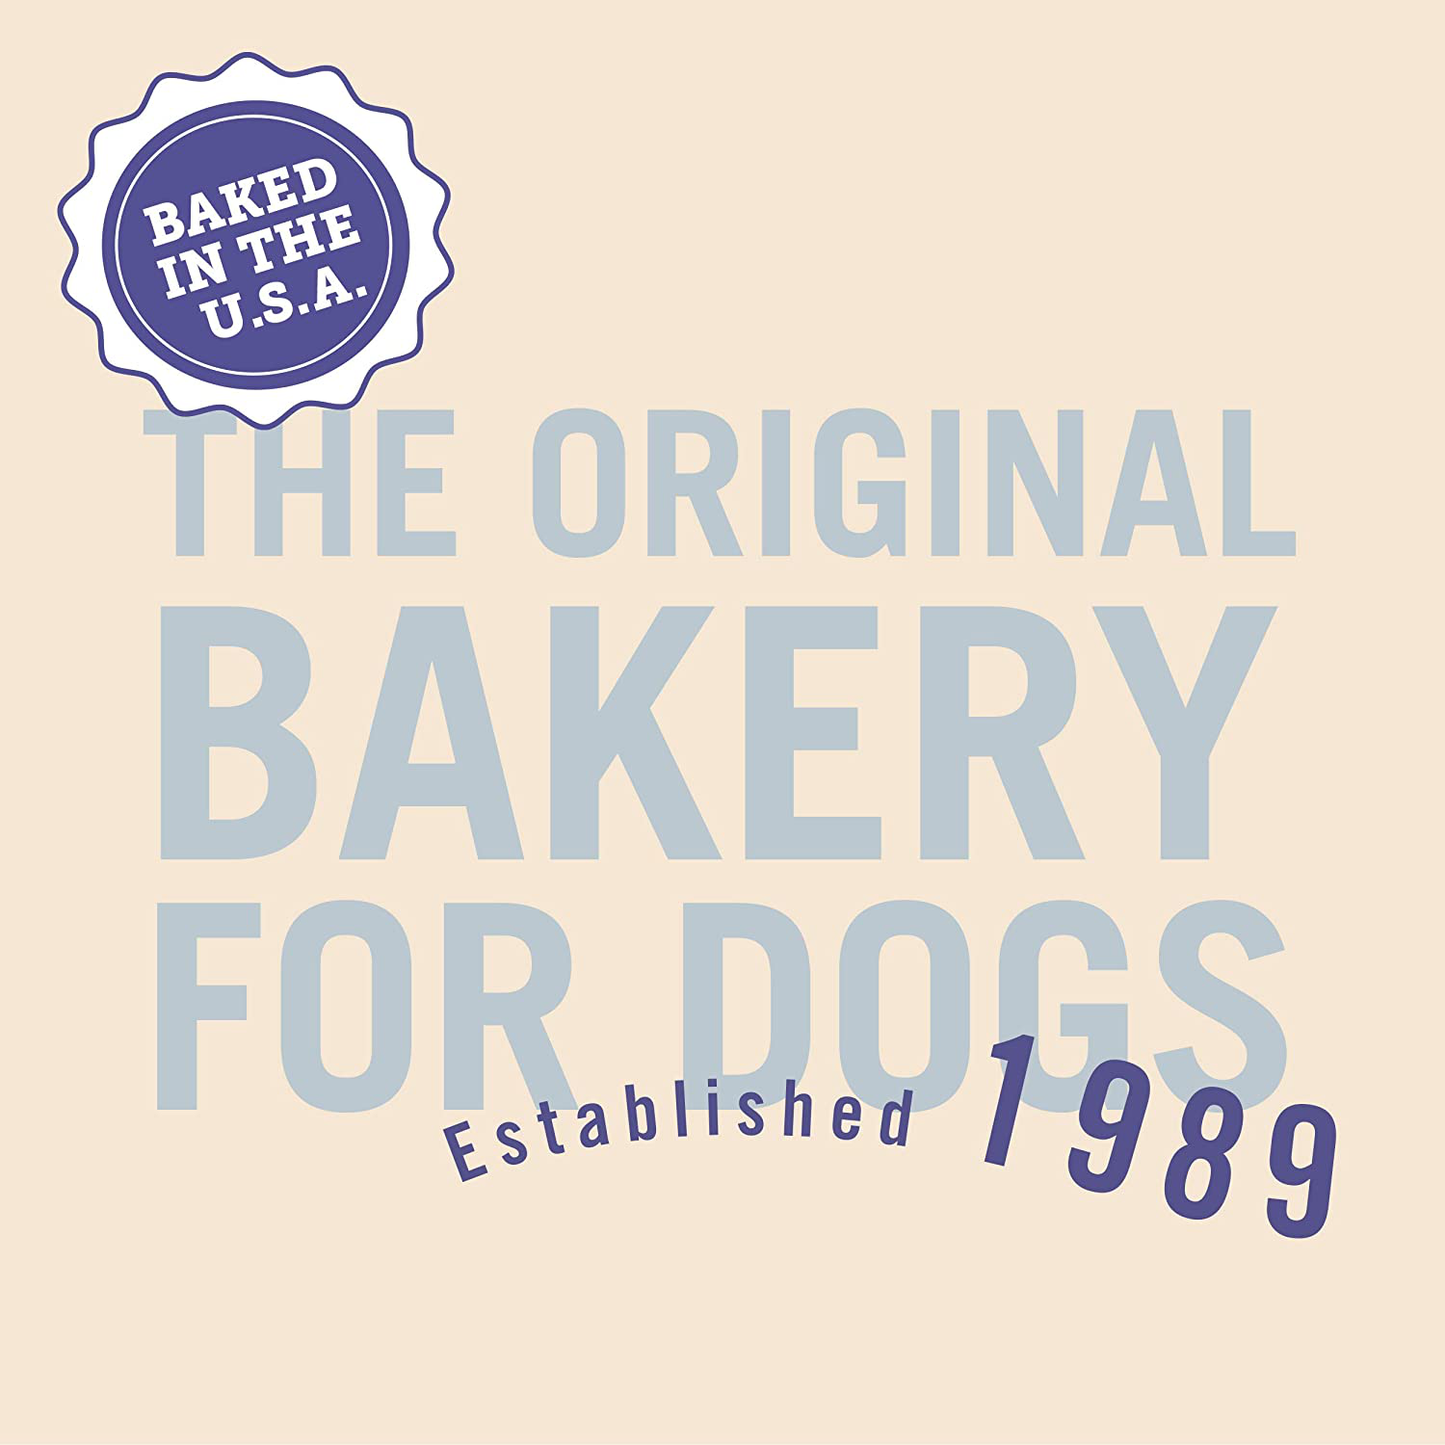 Three Dog Bakery Assort Mutt Trio, Soft Baked Cookies for Dogs Animals & Pet Supplies > Pet Supplies > Dog Supplies > Dog Treats Three Dog Bakery   